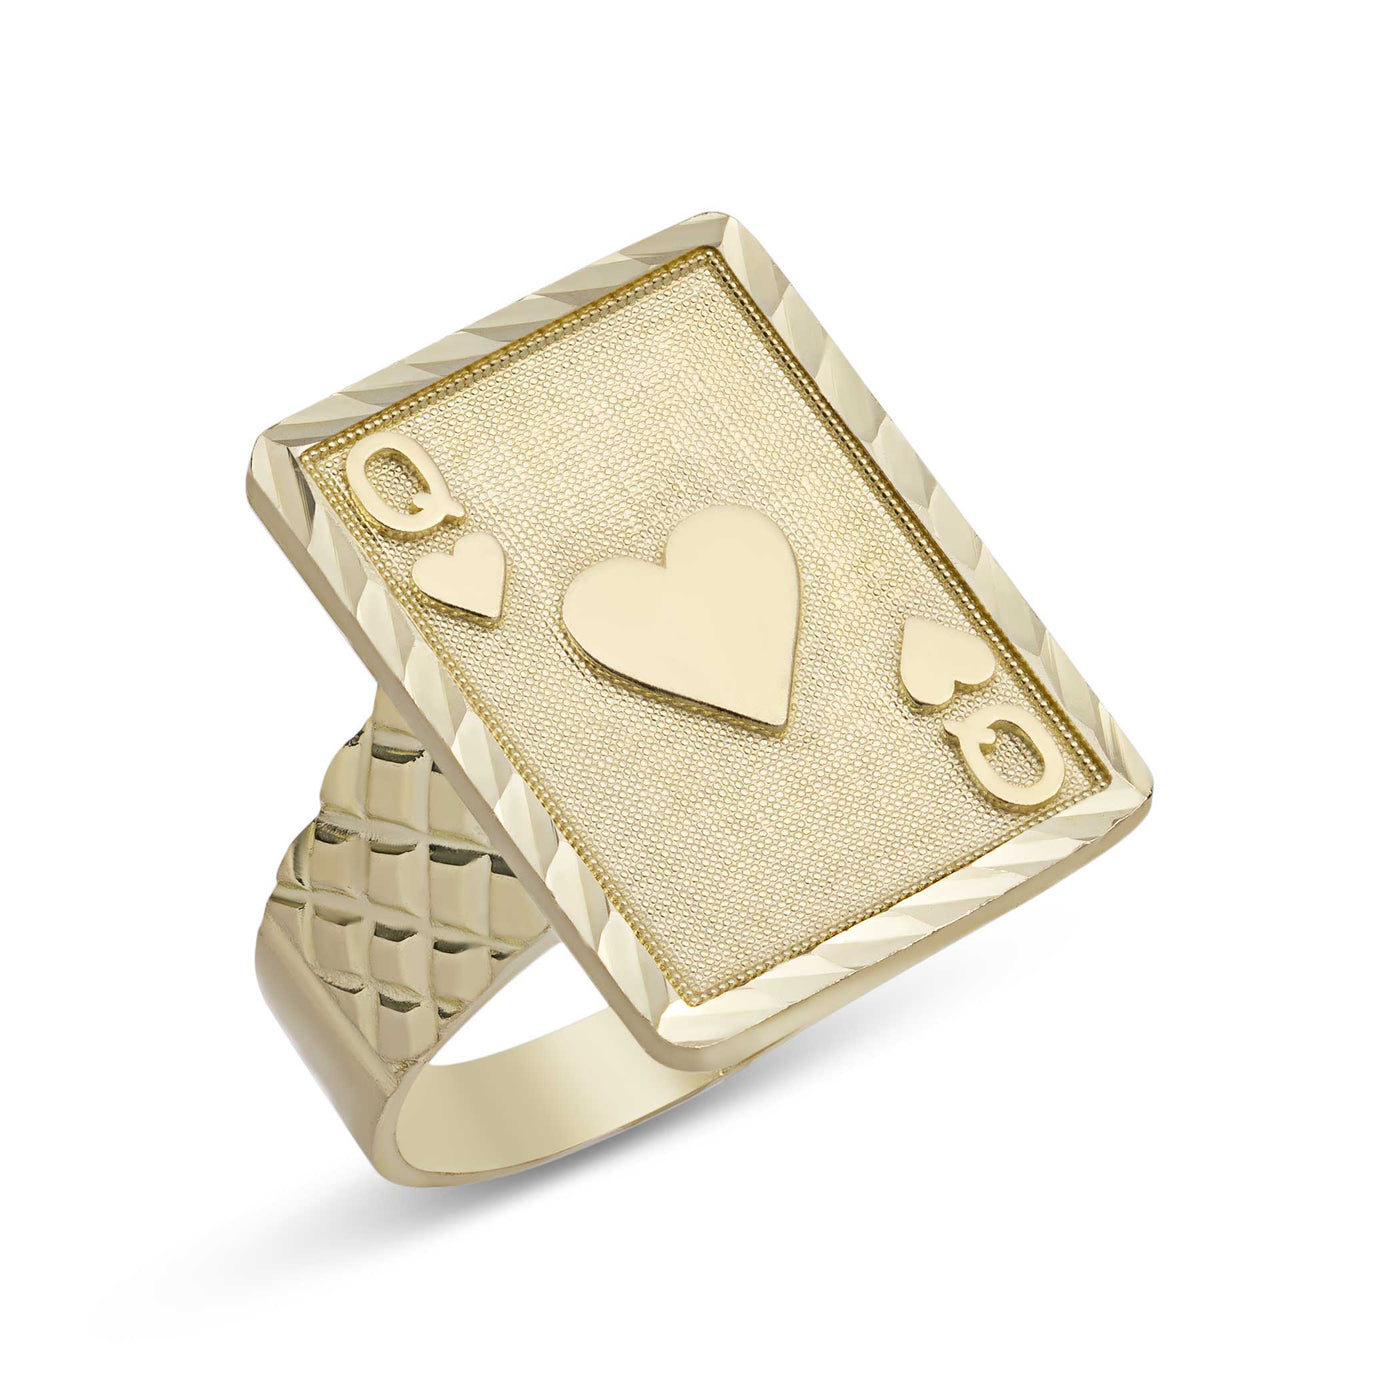 Queen of Hearts Playing Card Ring 10K Yellow Gold